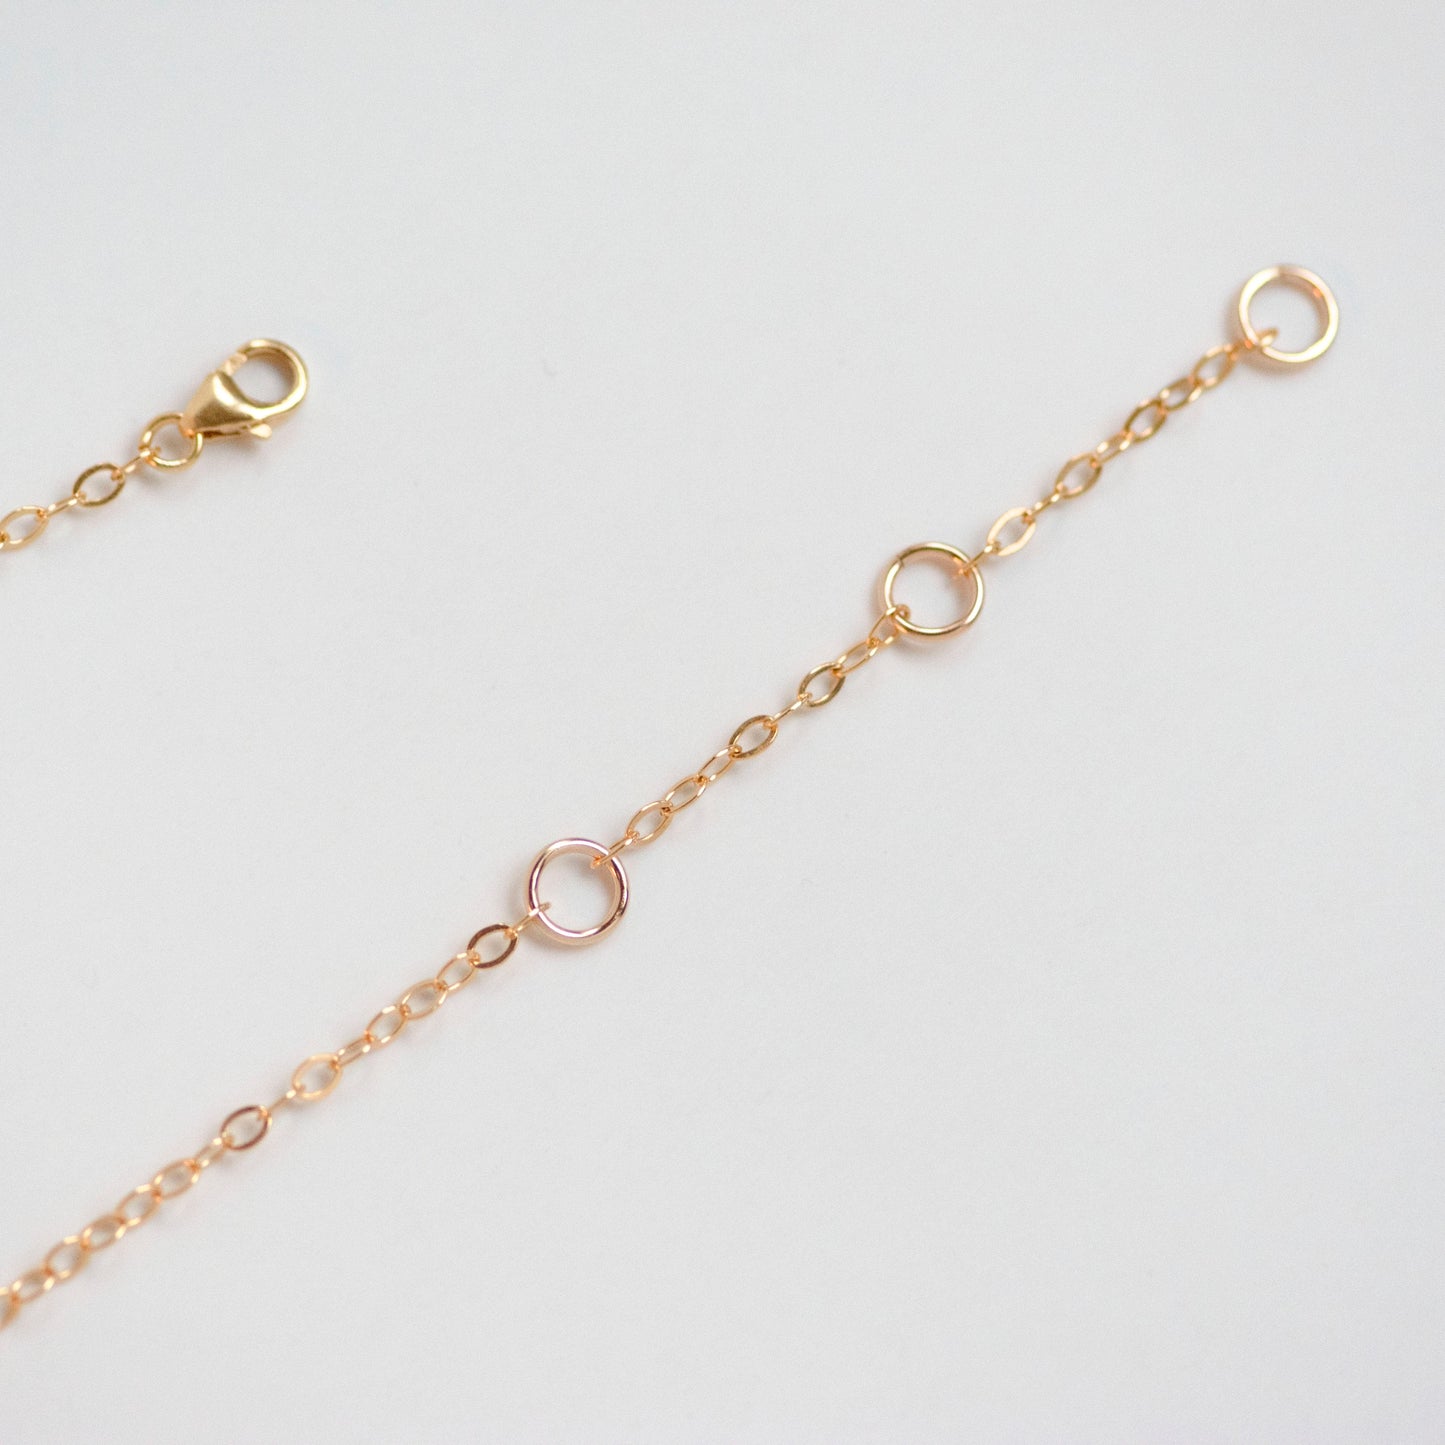 Chain Extender - Becoming Jewelry